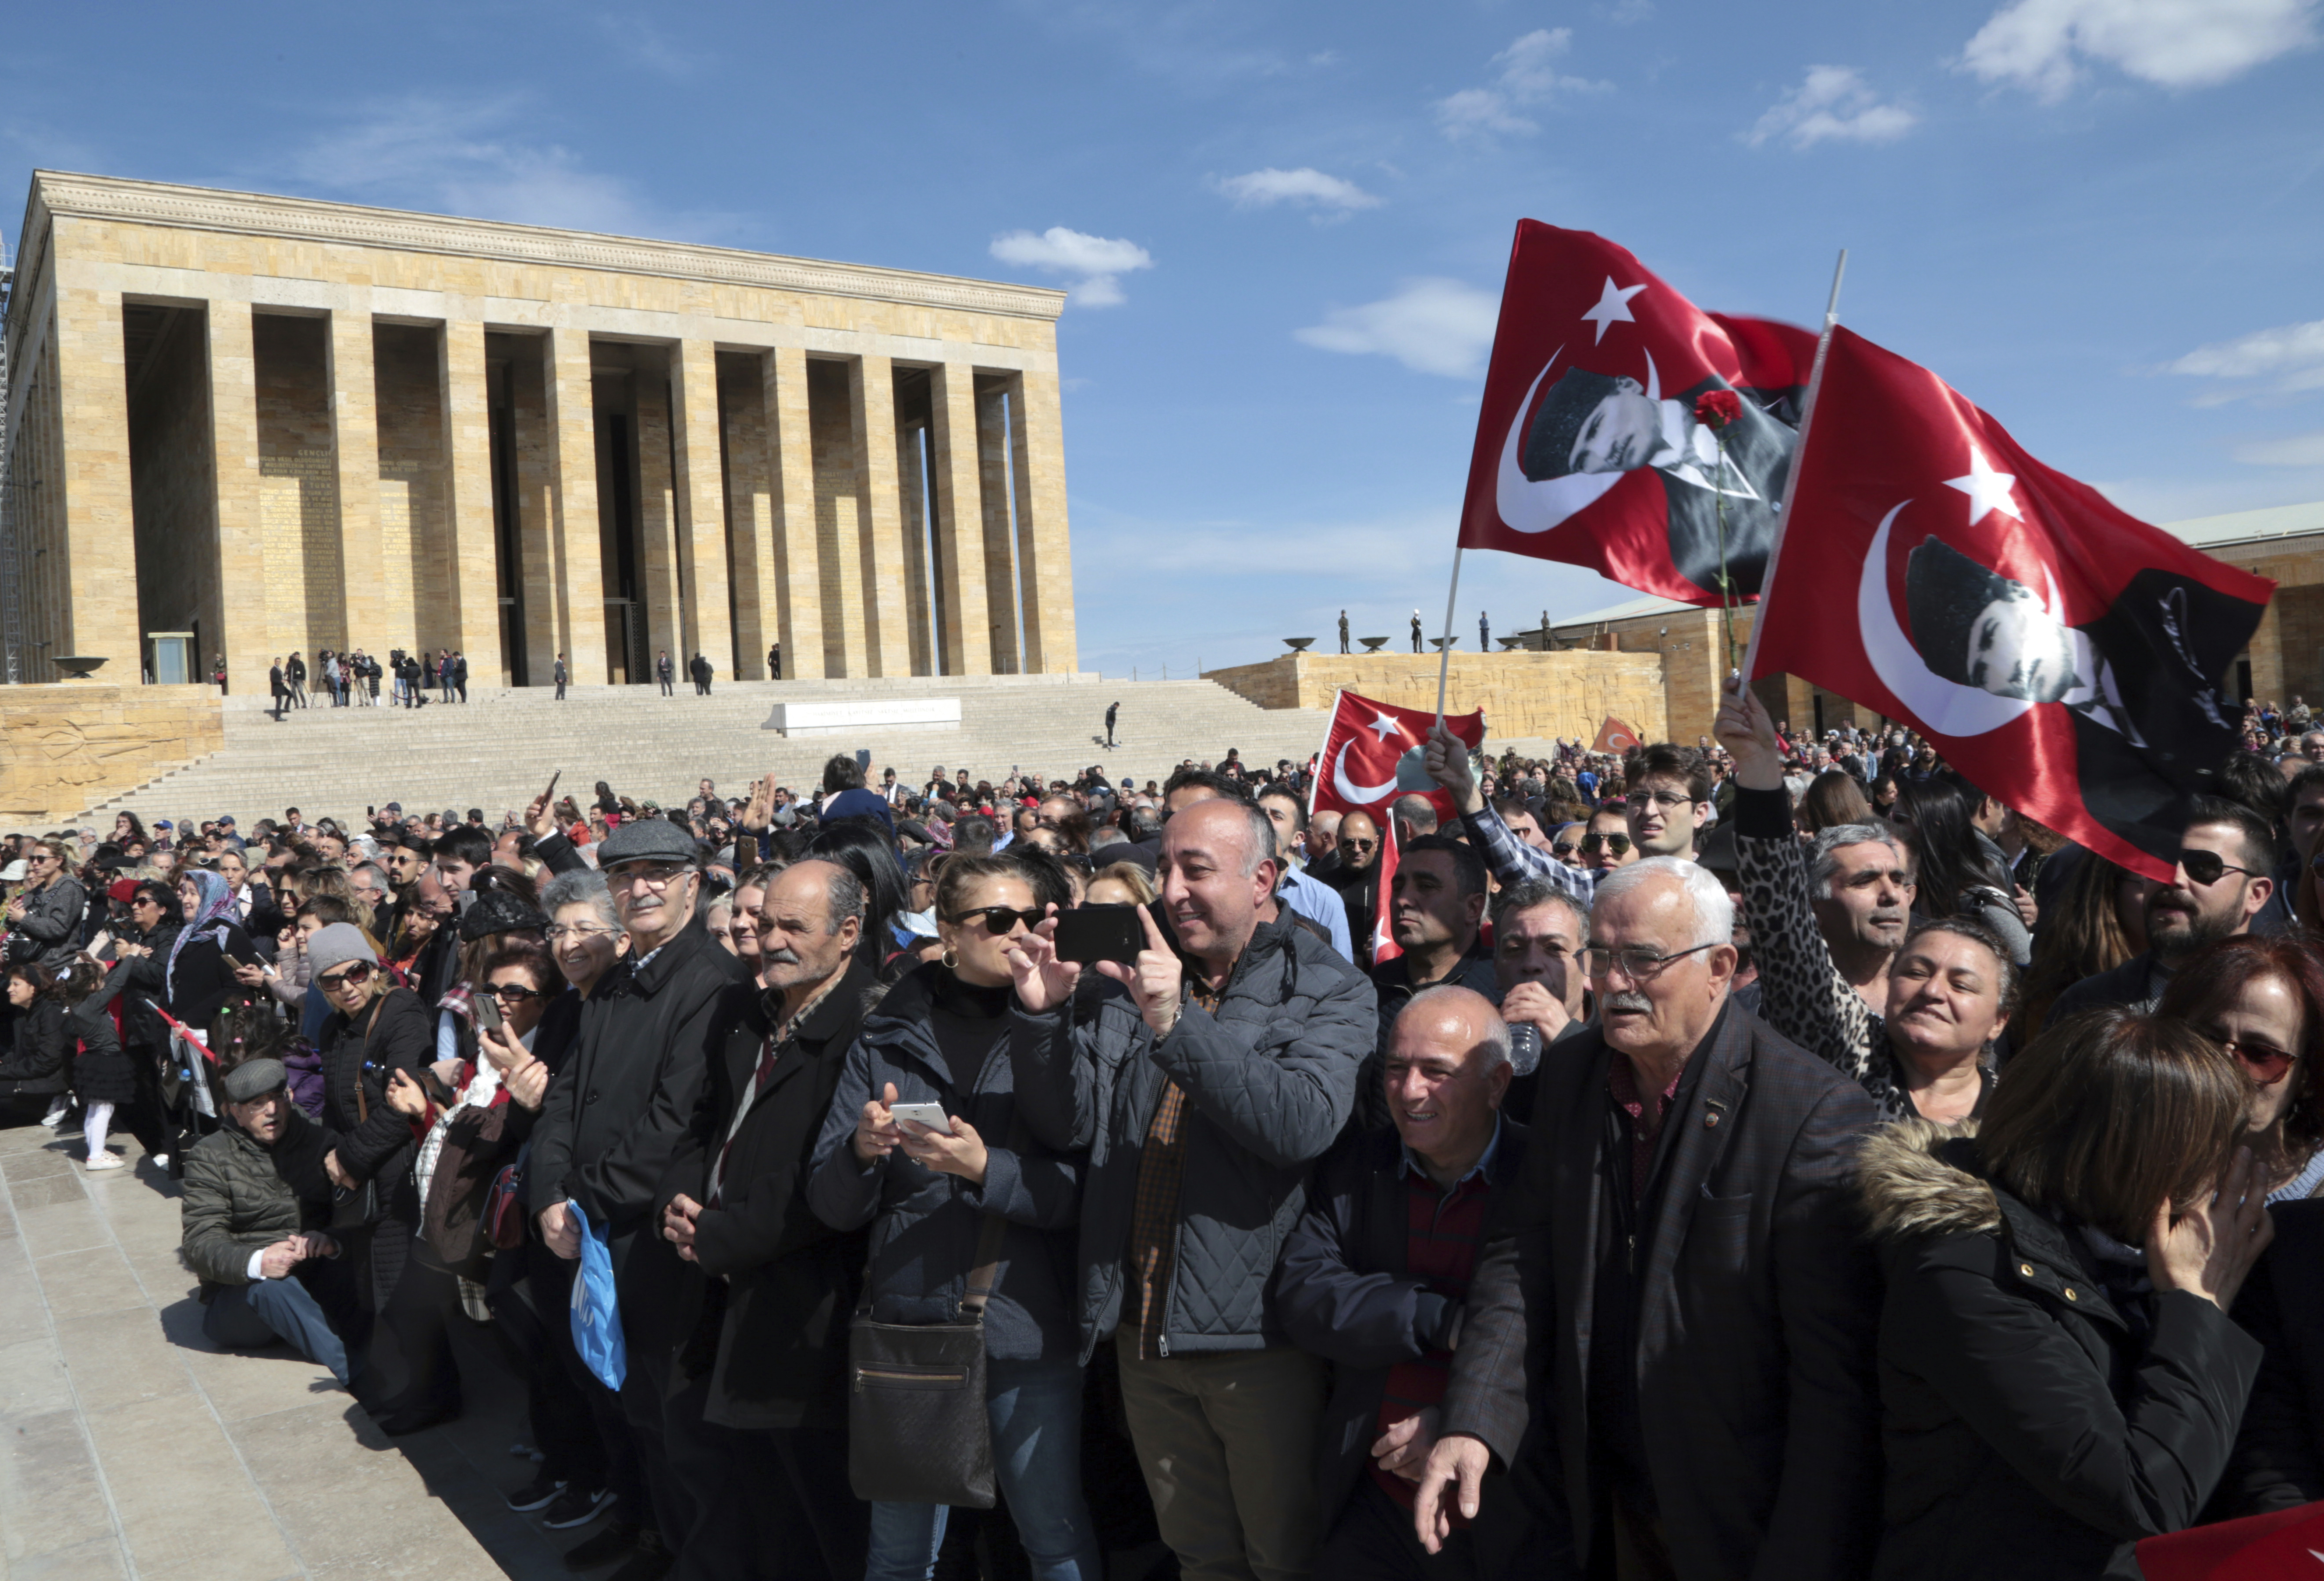 Thousands of supporters try to see Ekrem Imamoglu, the main Turkish opposition's candidate for Istanbul, as he visits the mausoleum of Mustafa Kemal Ataturk, in Ankara, Turkey, Tuesday, April 2, 2019.